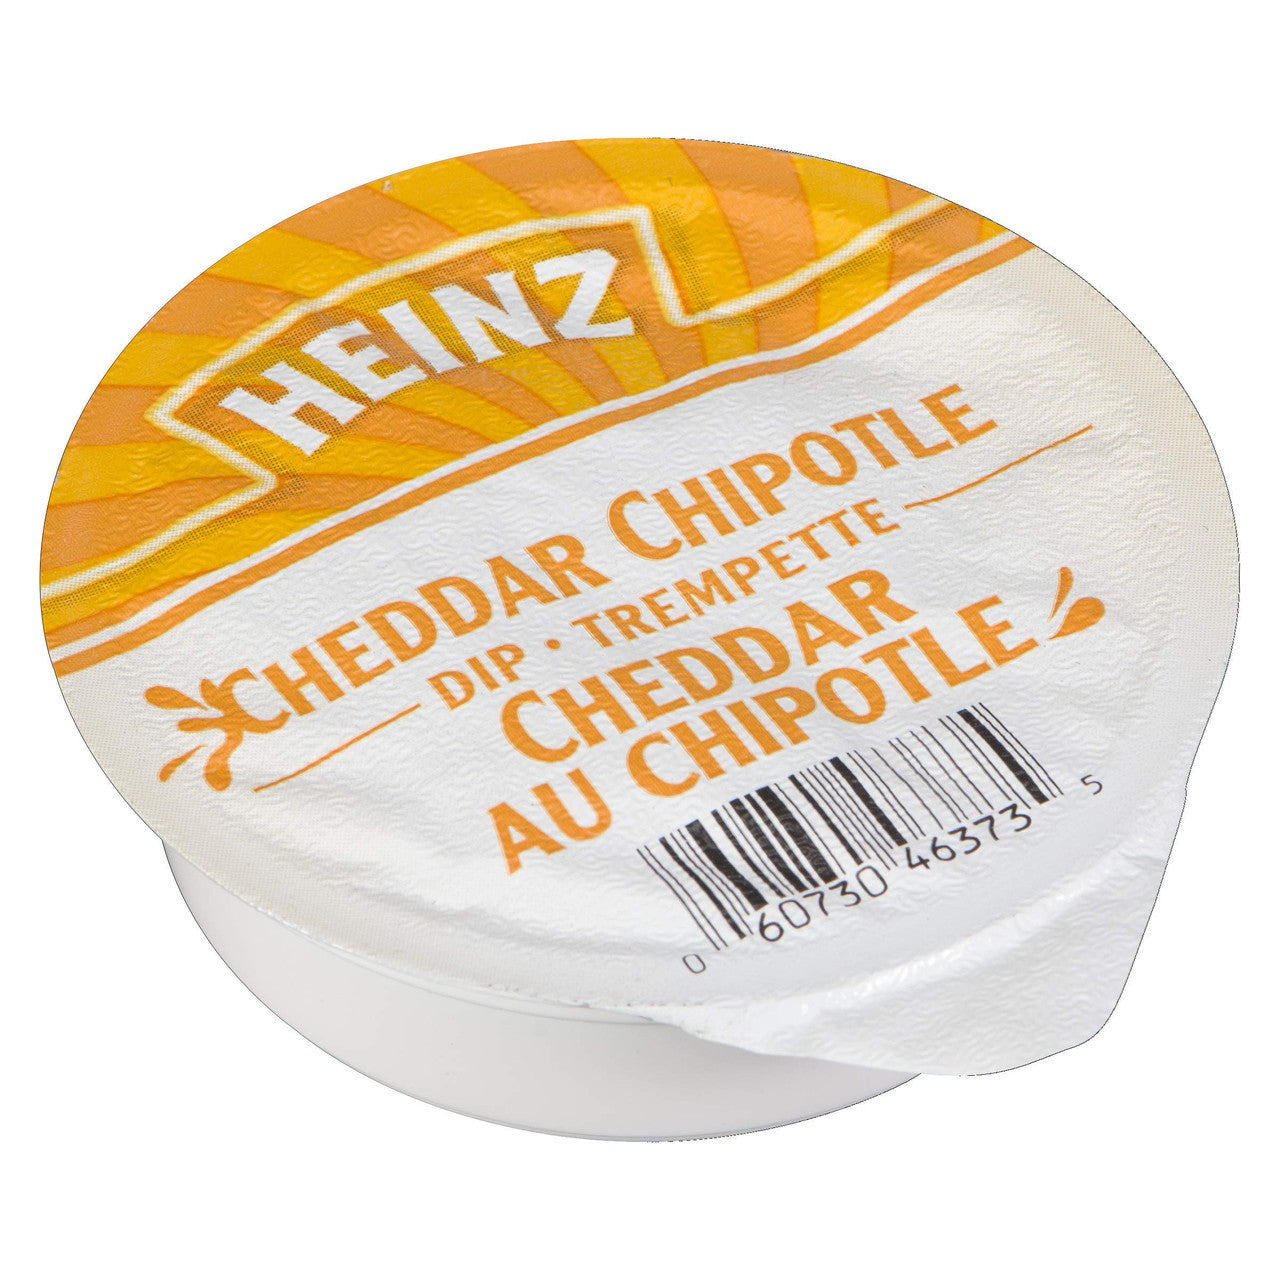 HEINZ Cheddar Chipotle Dip Cups, 44ml Cups, 100 Count, {Imported from Canada}